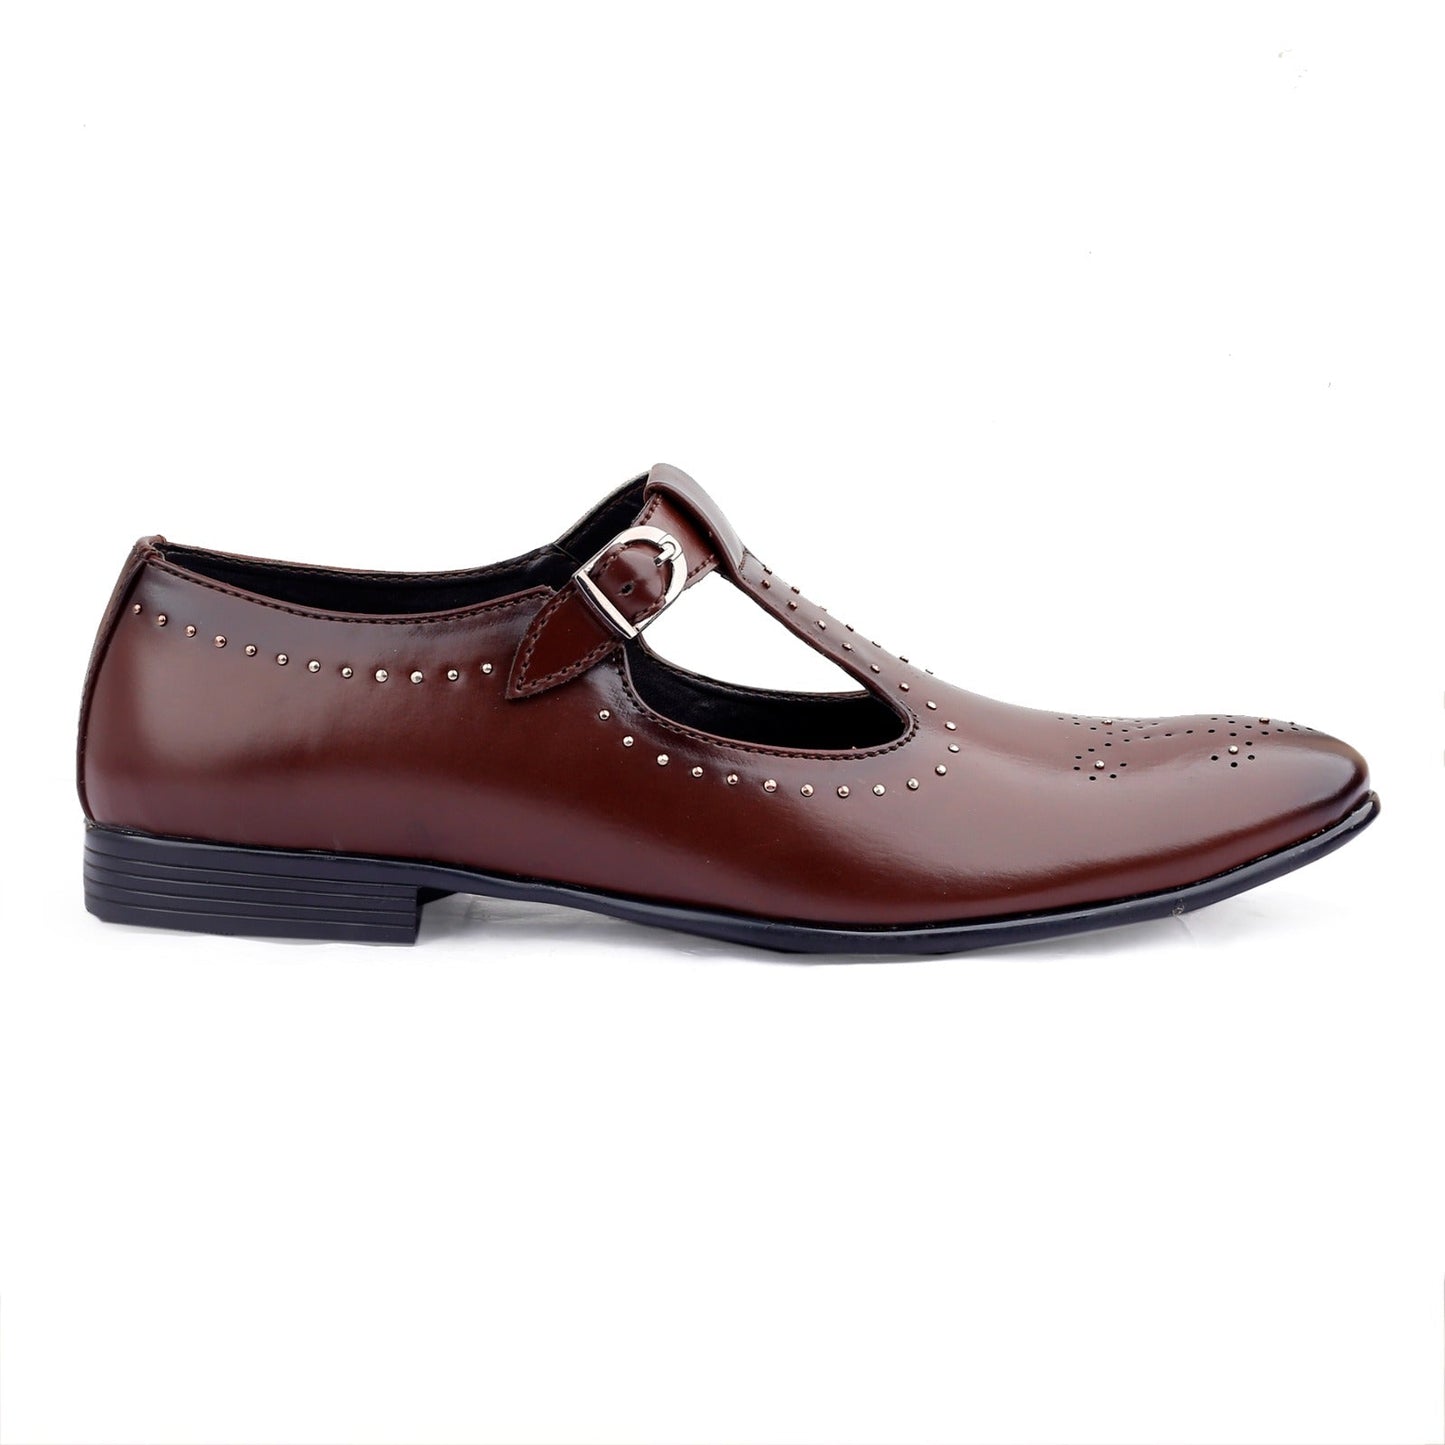 Fashion Suede Peshawari Shoes For Partywear And Casualwear - JackMarc